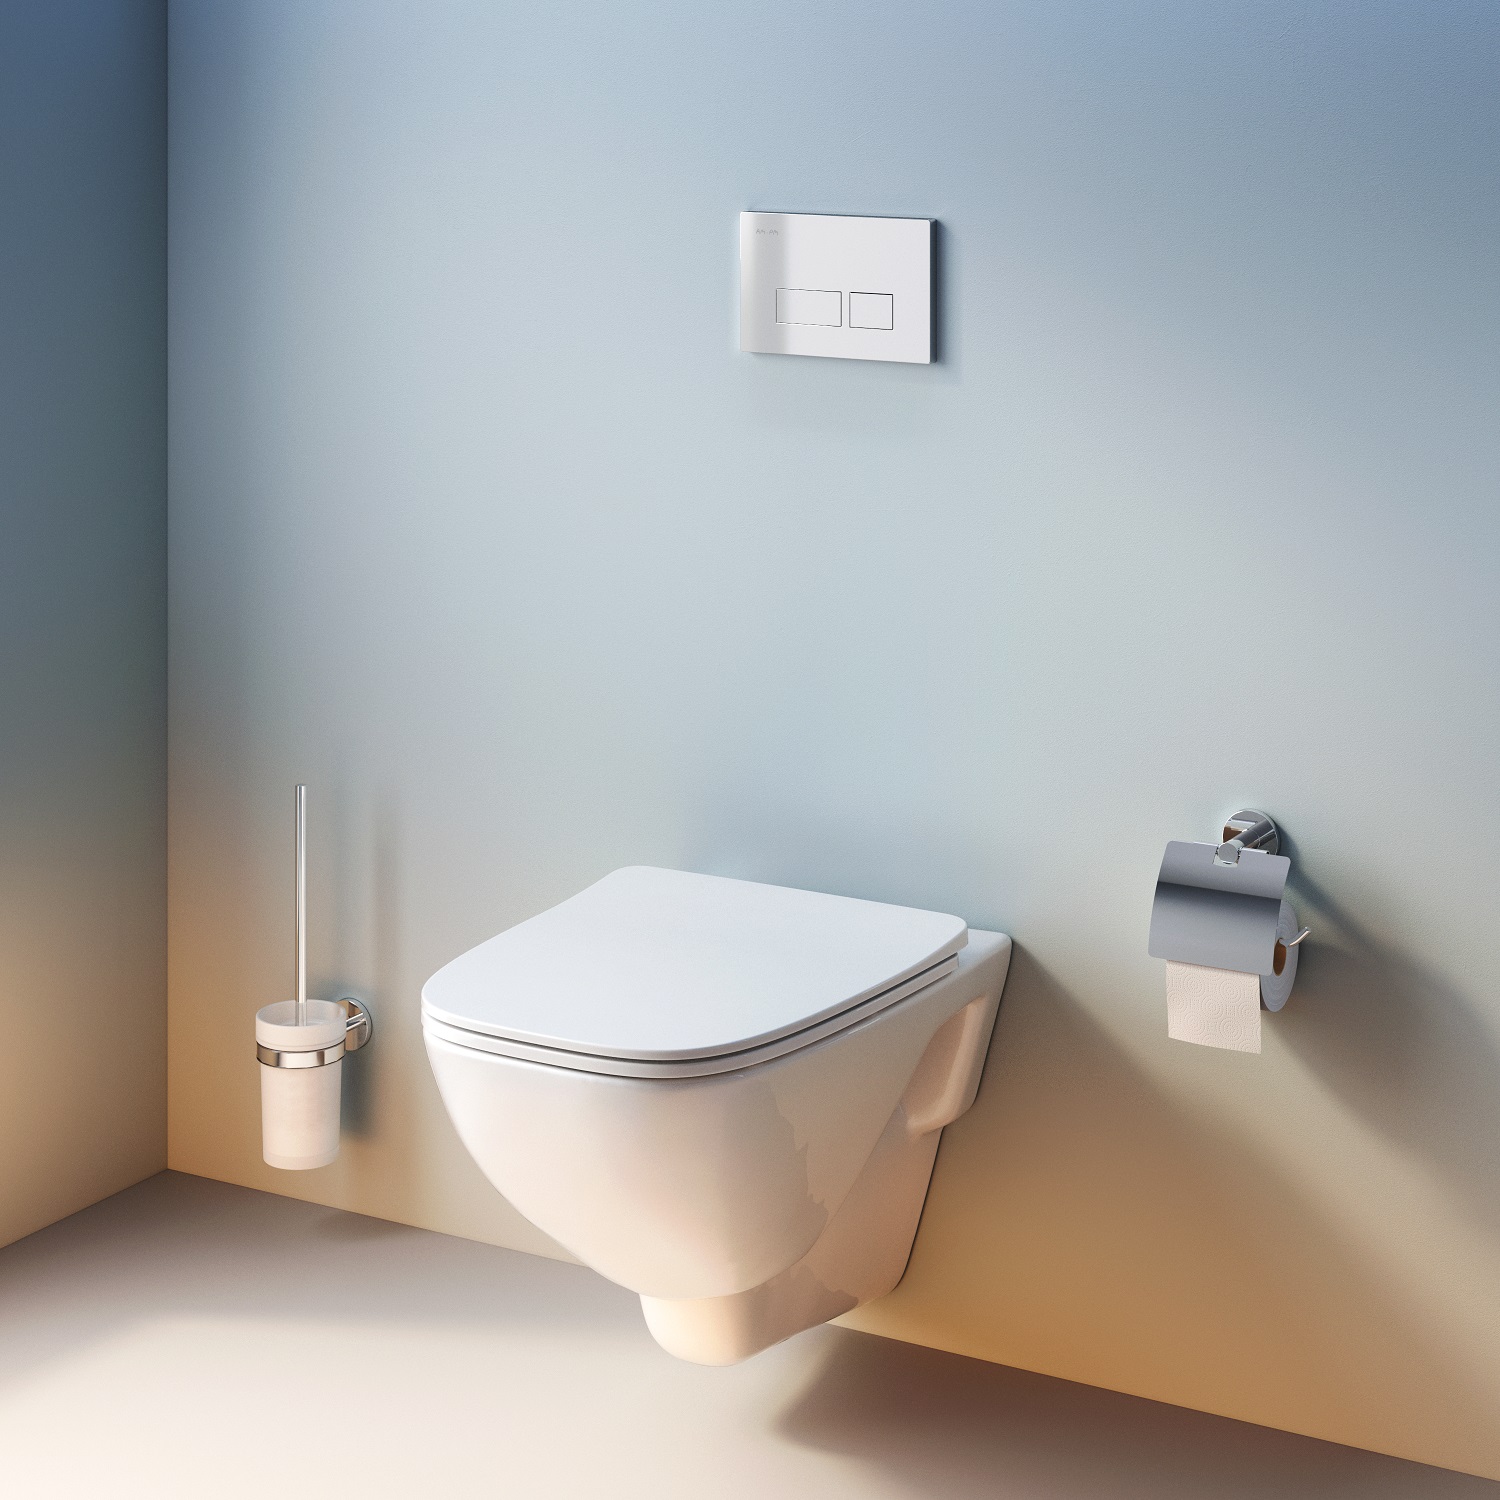 FlashClean (rimless) wall-mounted toilet with soft-closing seat cover